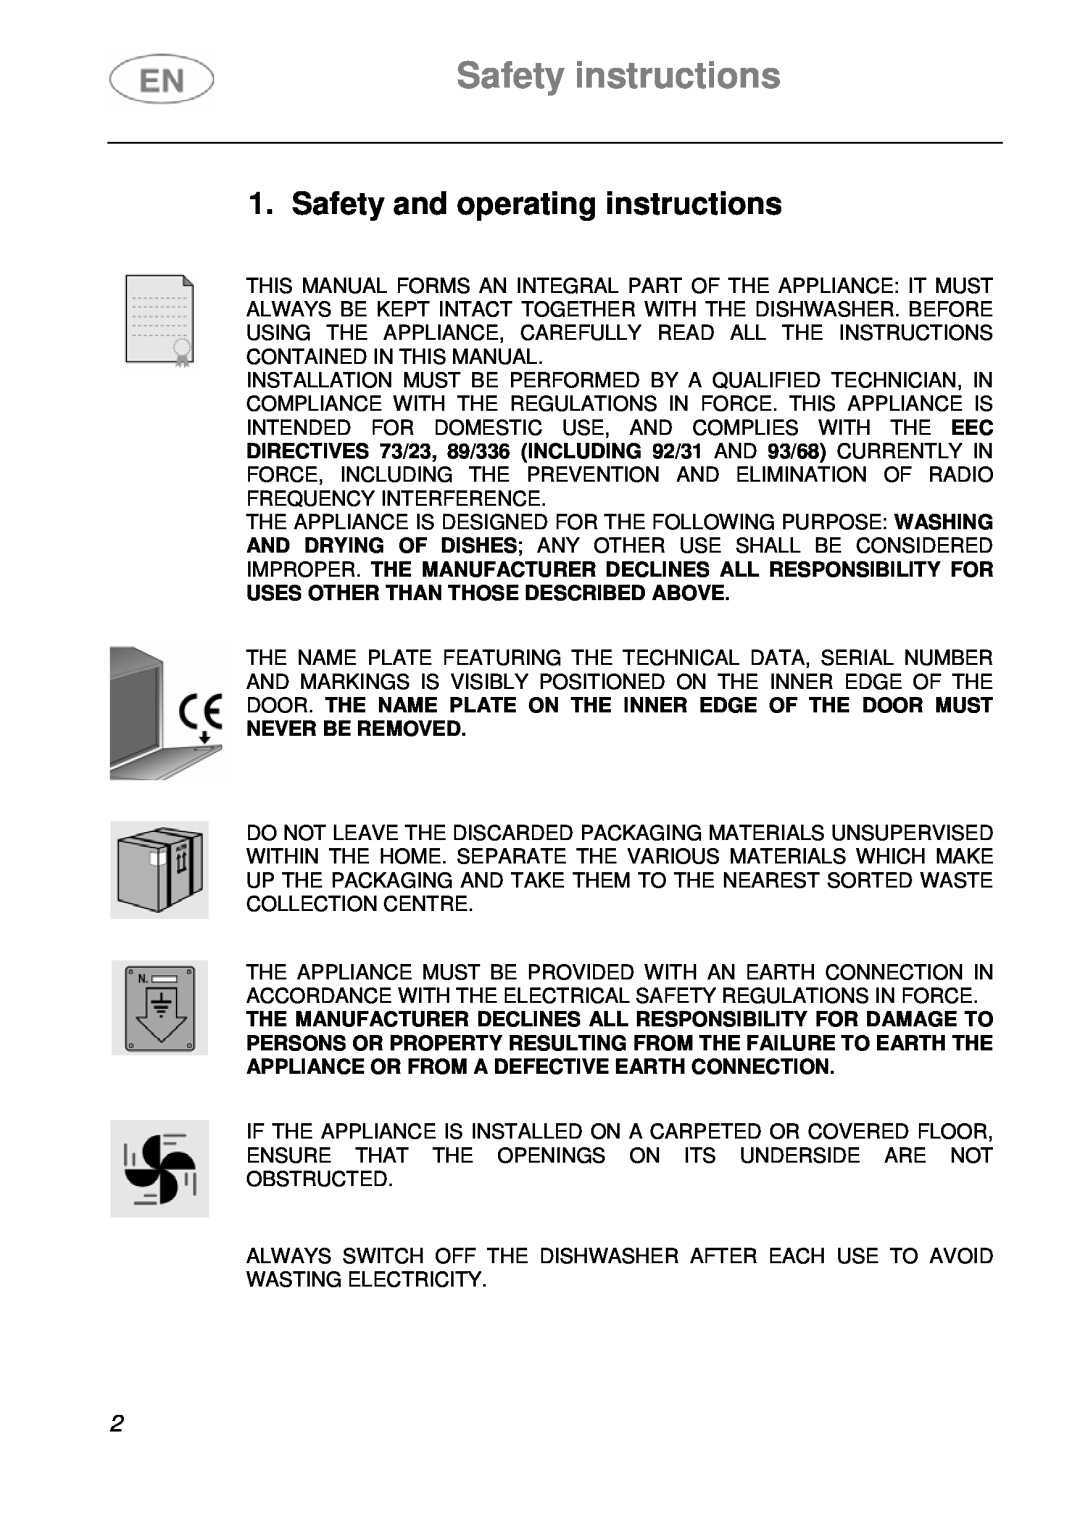 Smeg STA6249, STA6248 Safety instructions, Safety and operating instructions, Uses Other Than Those Described Above 